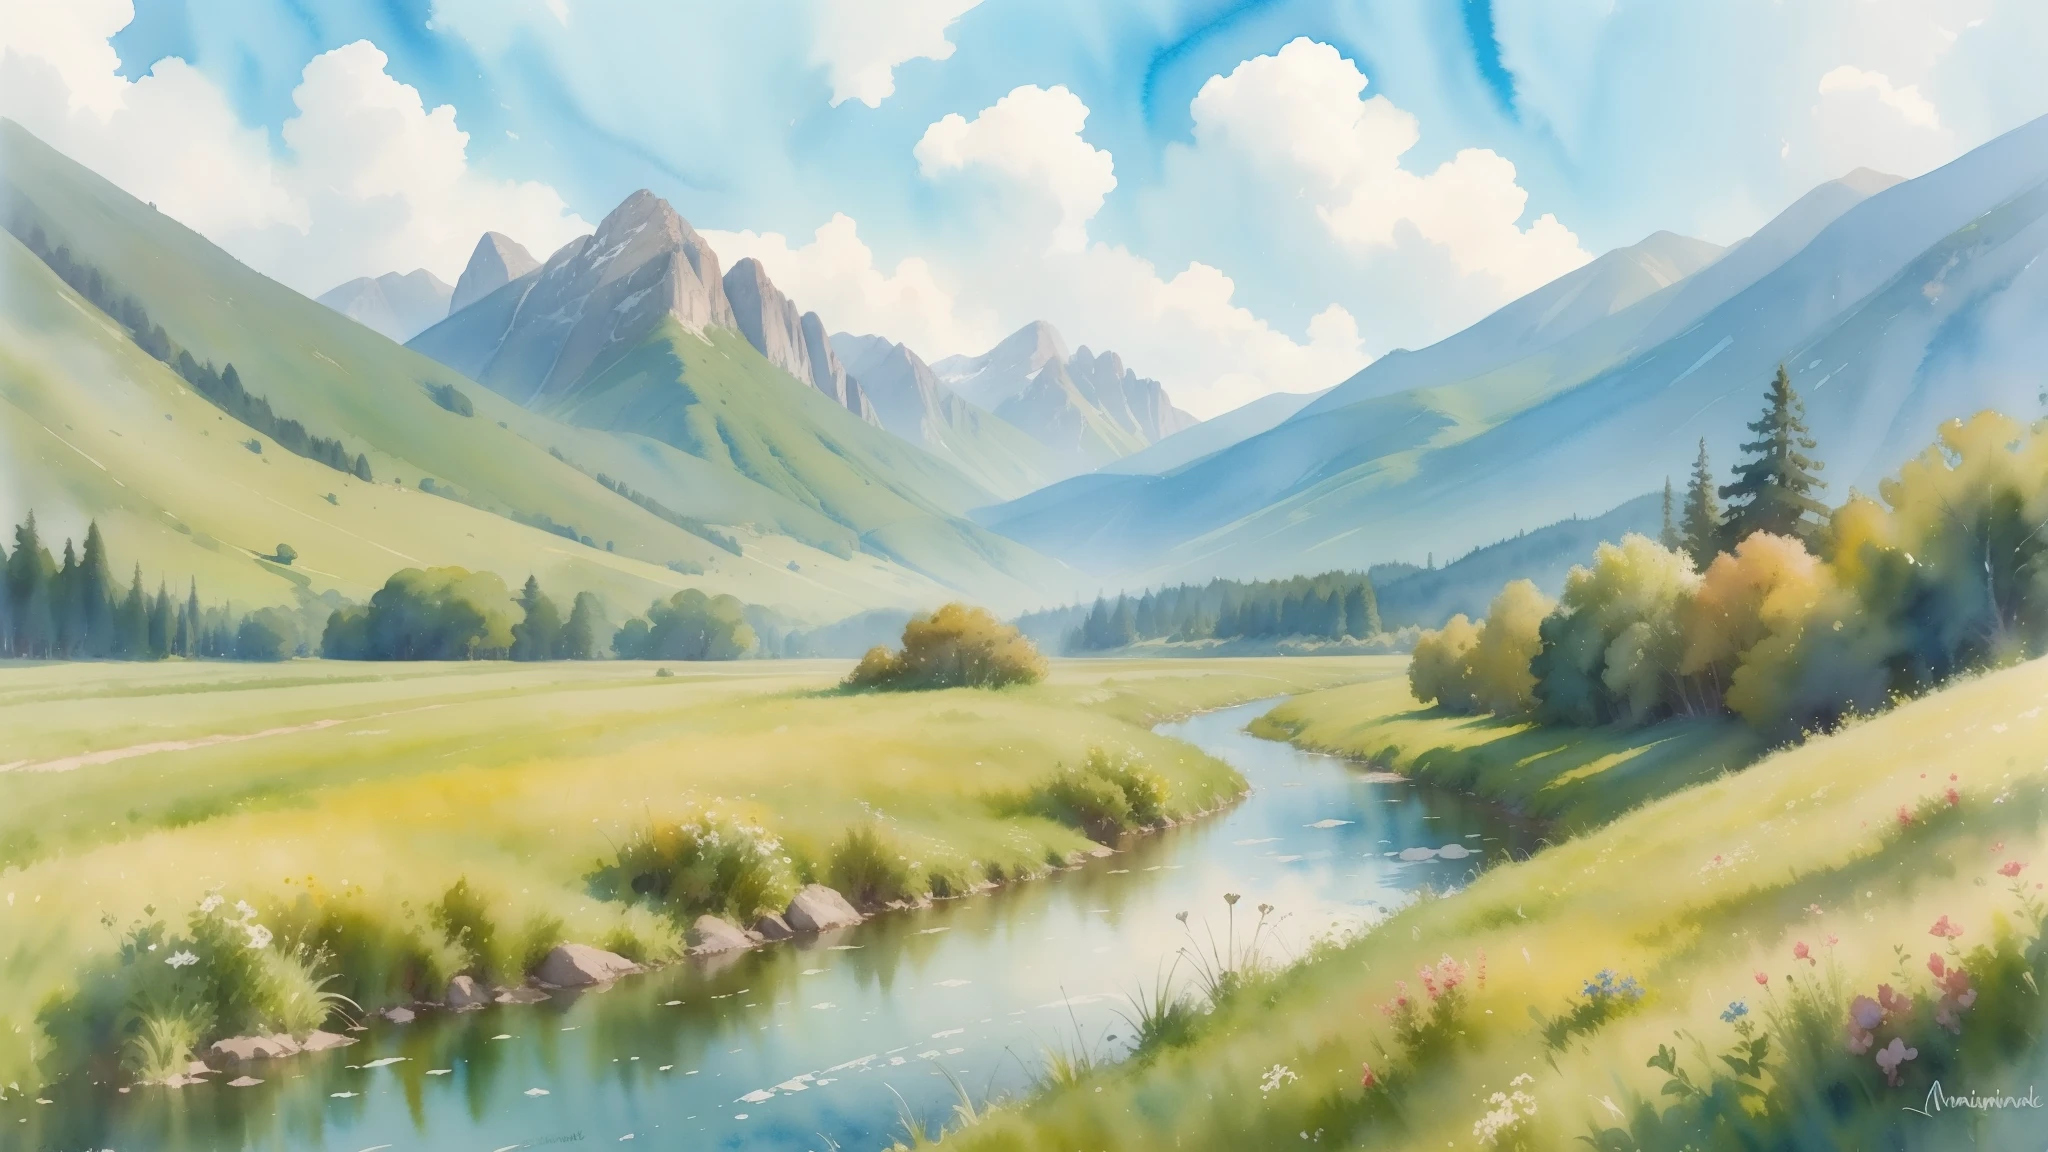 a peaceful watercolor landscape, mountains in the background, a winding river flowing through a lush green meadow, colorful wildflowers dotting the scene, a warm golden sun illuminating the tranquil atmosphere, soft brushstrokes creating an impressionistic style, vivid colors blending seamlessly, a sense of calm and serenity,ultra-detailed,(watercolor painting),landscape,impressionism,vibrant colors,natural lighting,soft focus,plein air,atmospheric perspective